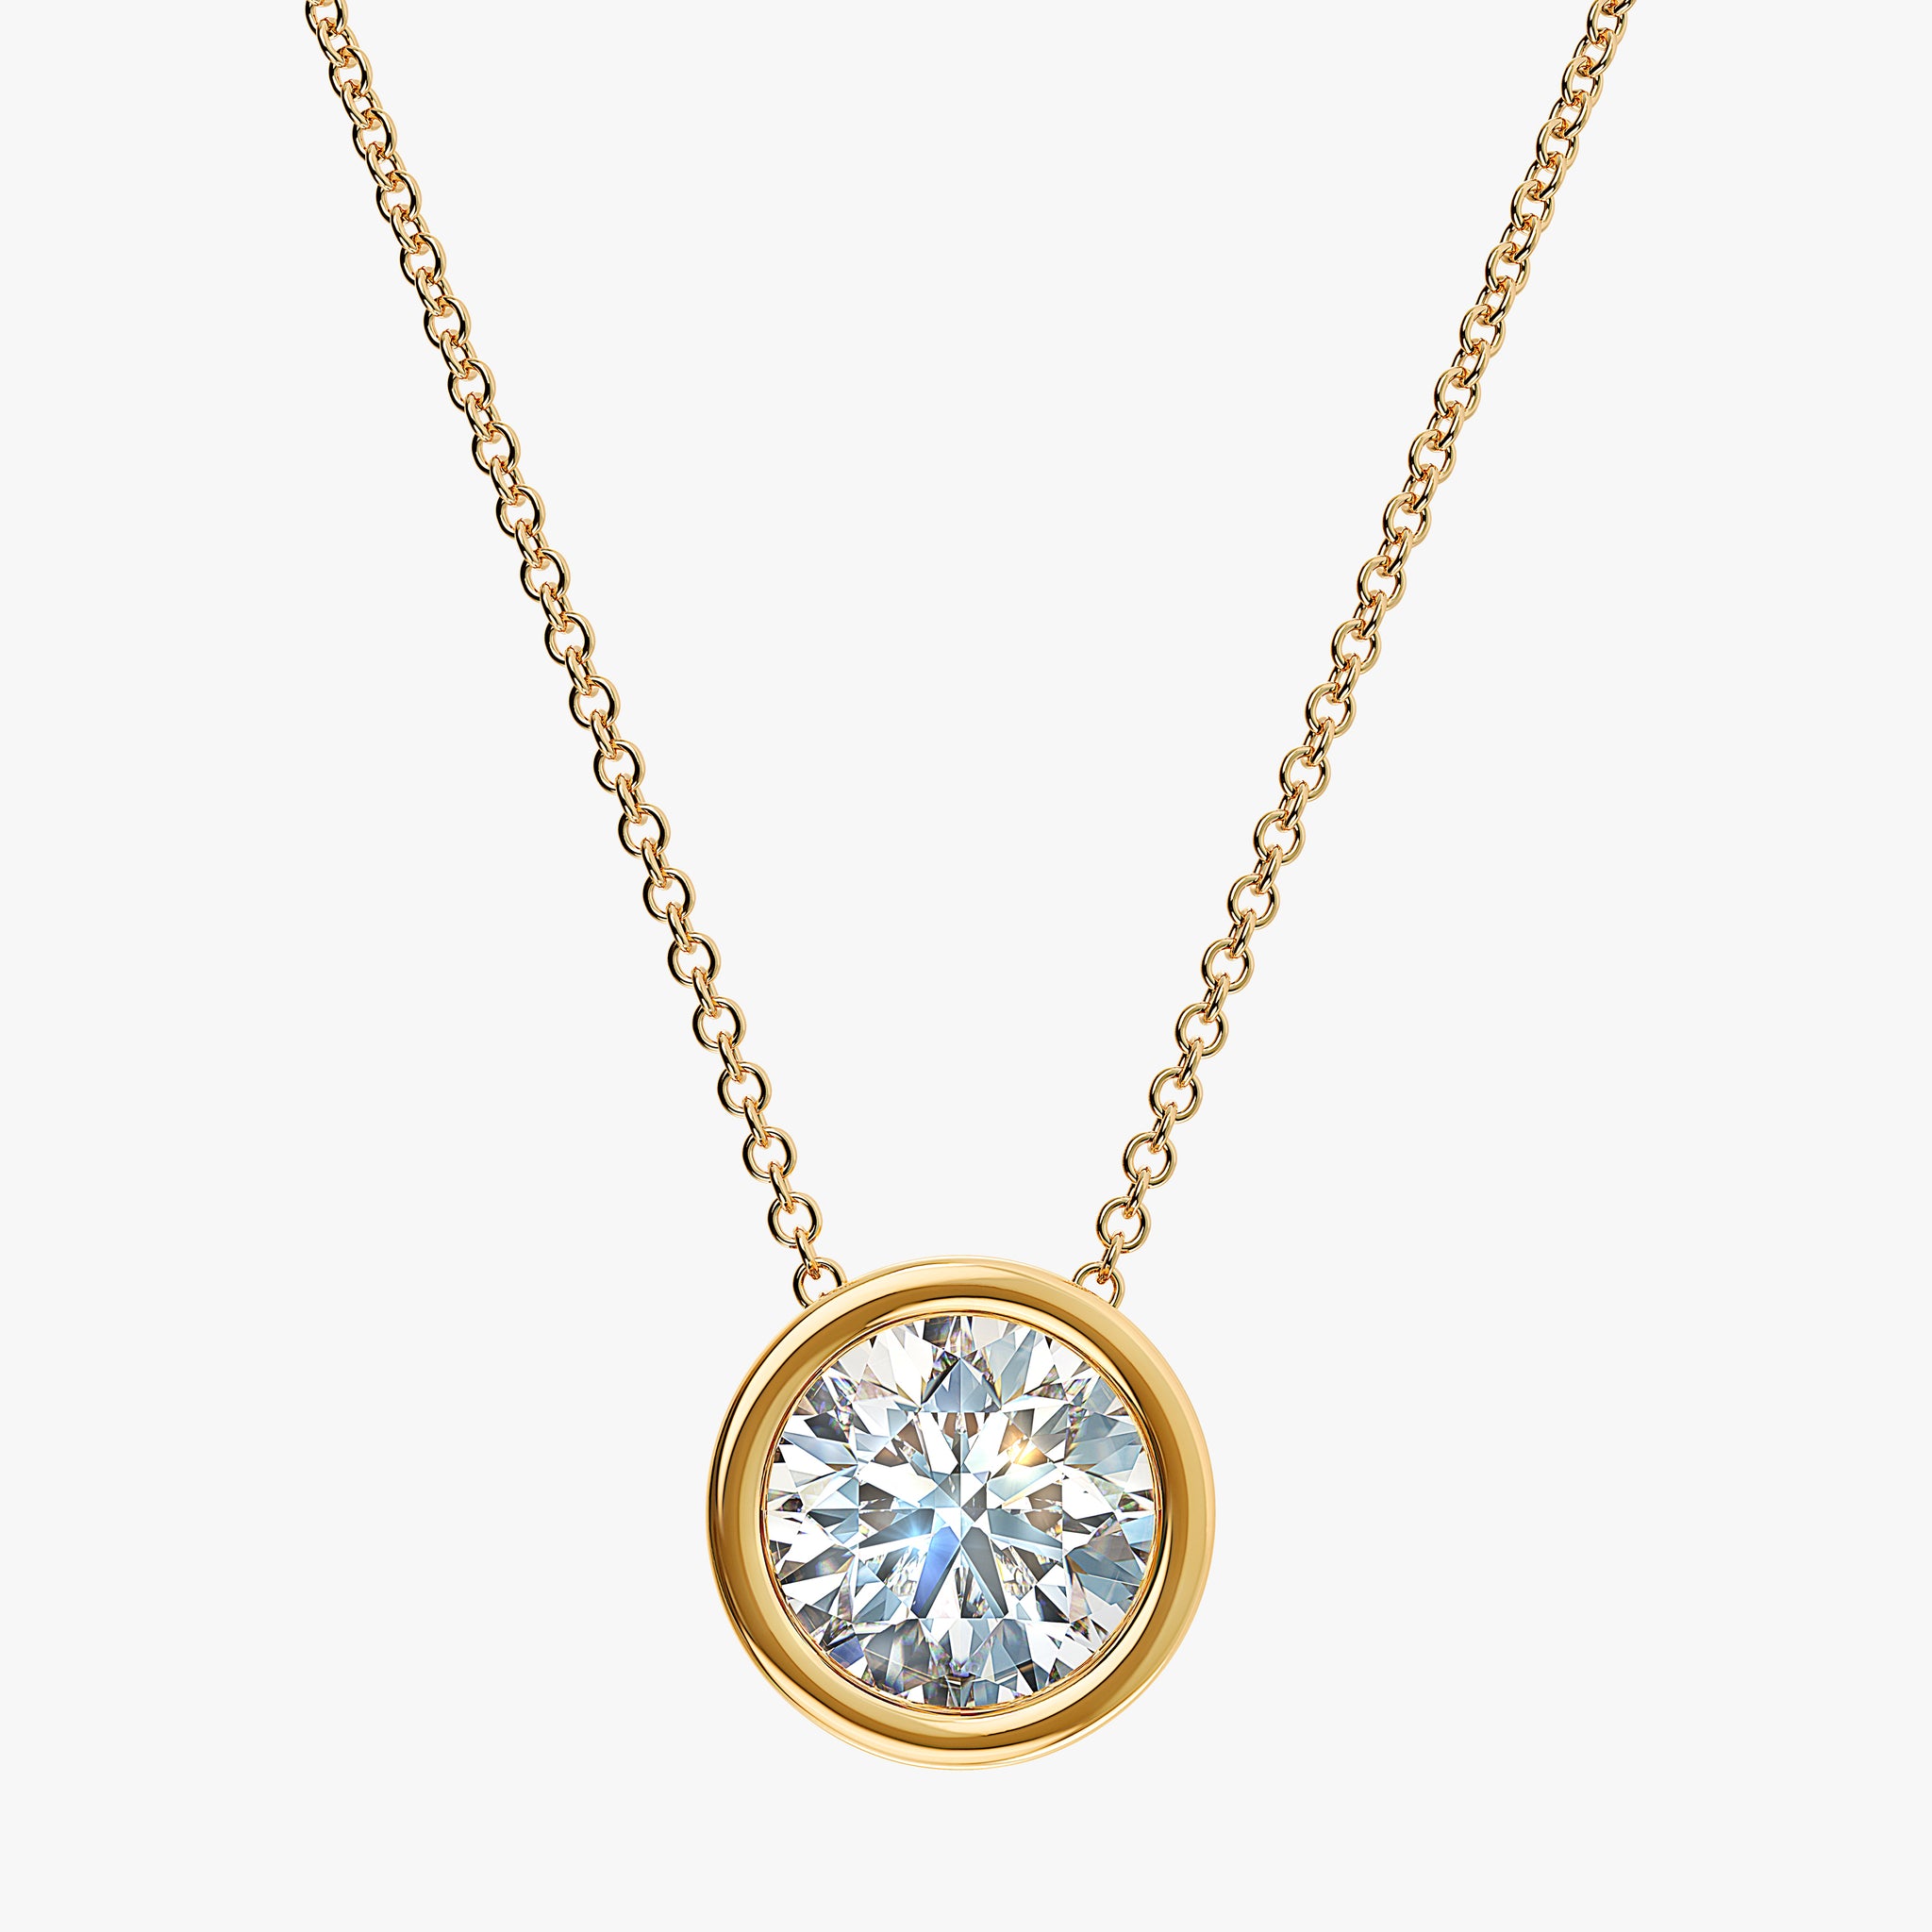 J'EVAR 14kt Yellow Gold Solitaire Diamond Necklace ALTR Lab Grown Bezel Solitaire Diamond Necklace Front View